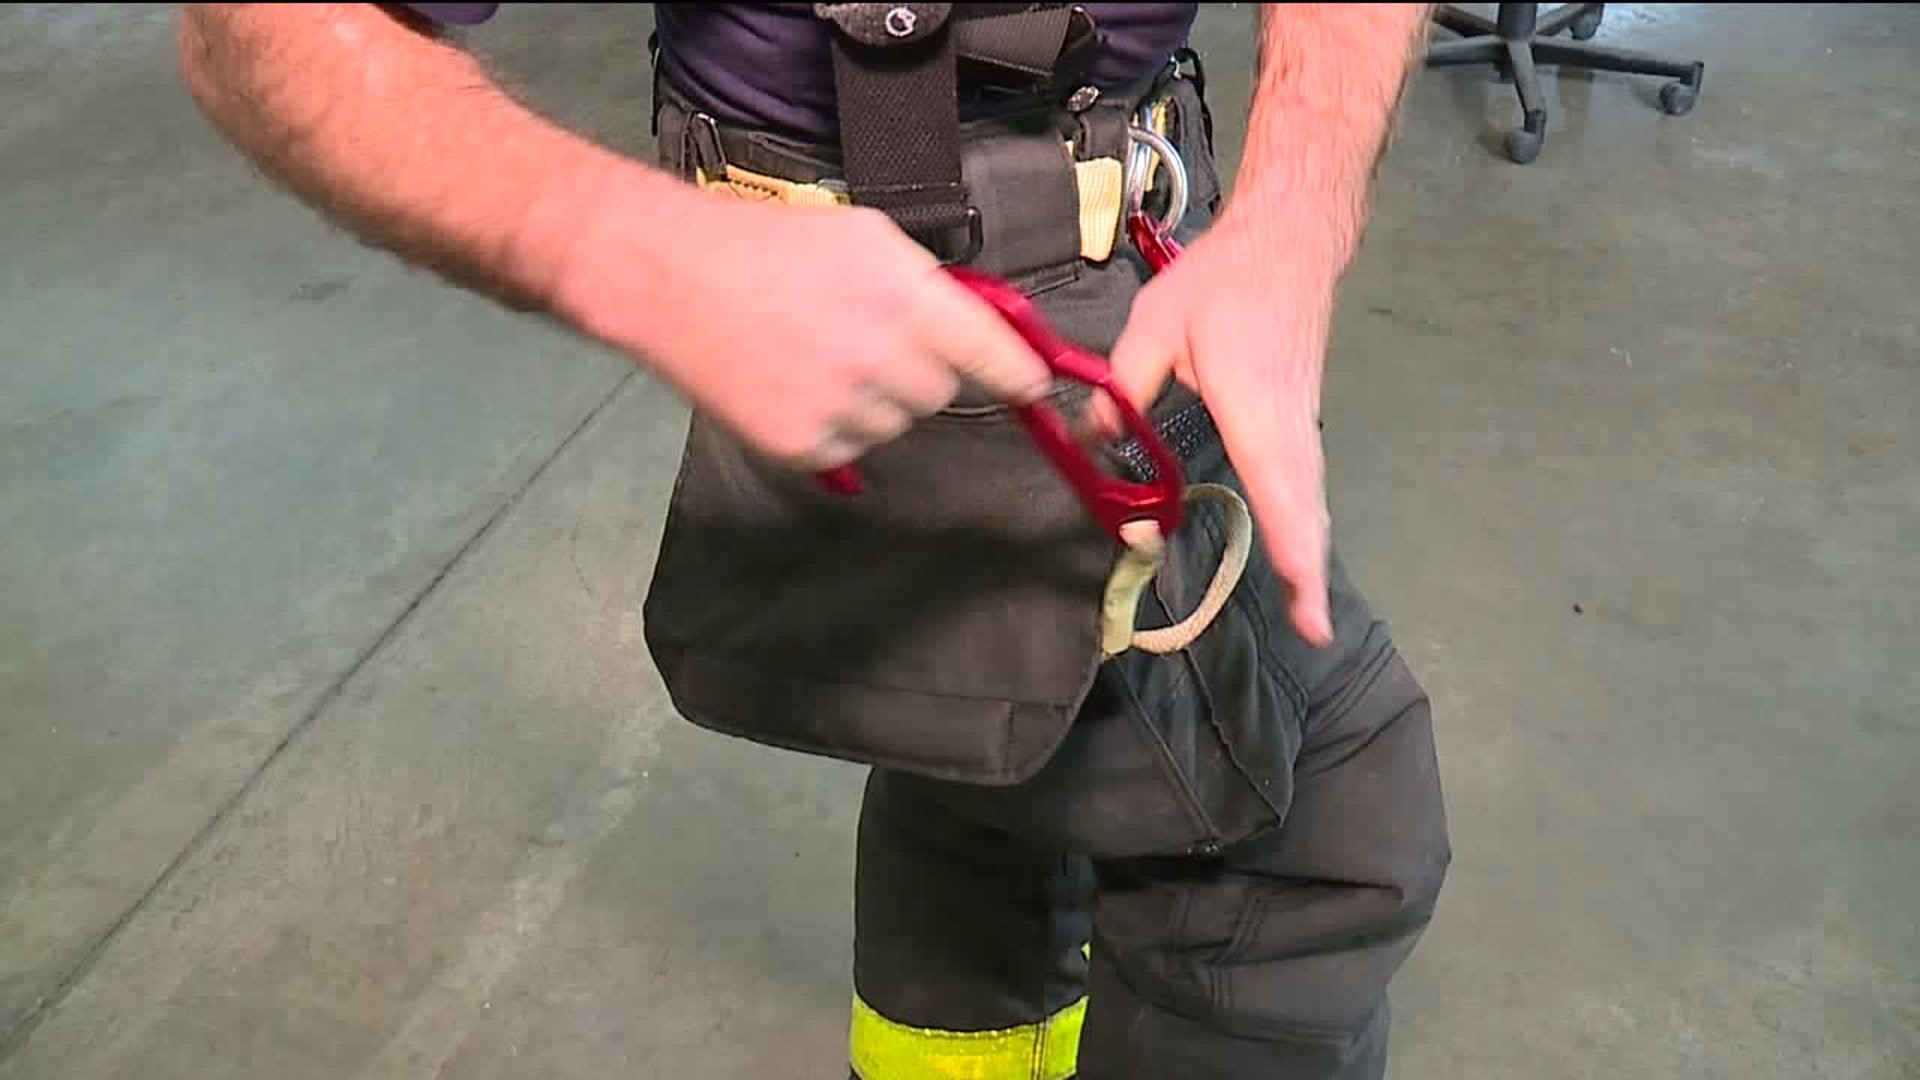 Firefighters Train with New Safety Tool